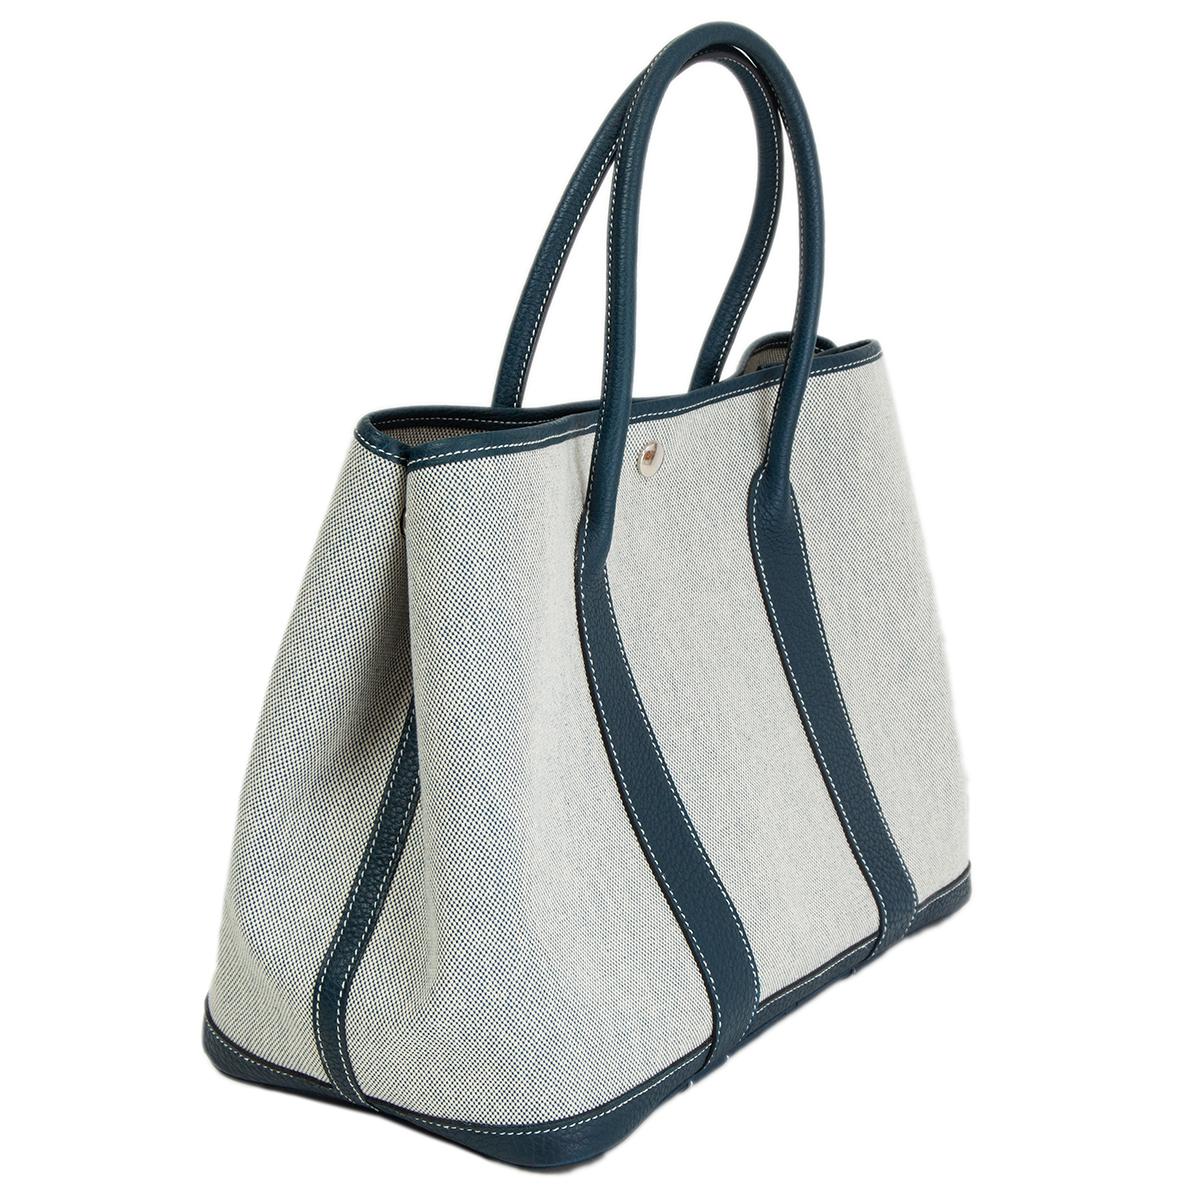 100% authentic Hermès 'Garden Party 36' tote in Ecru (off-white) Toile H canvas with details in Bleu de Prusse Cuir Negonda leather and contrasting white stitching. Unlined. Closes with a snap-button on top. Has been carried and is in excellent